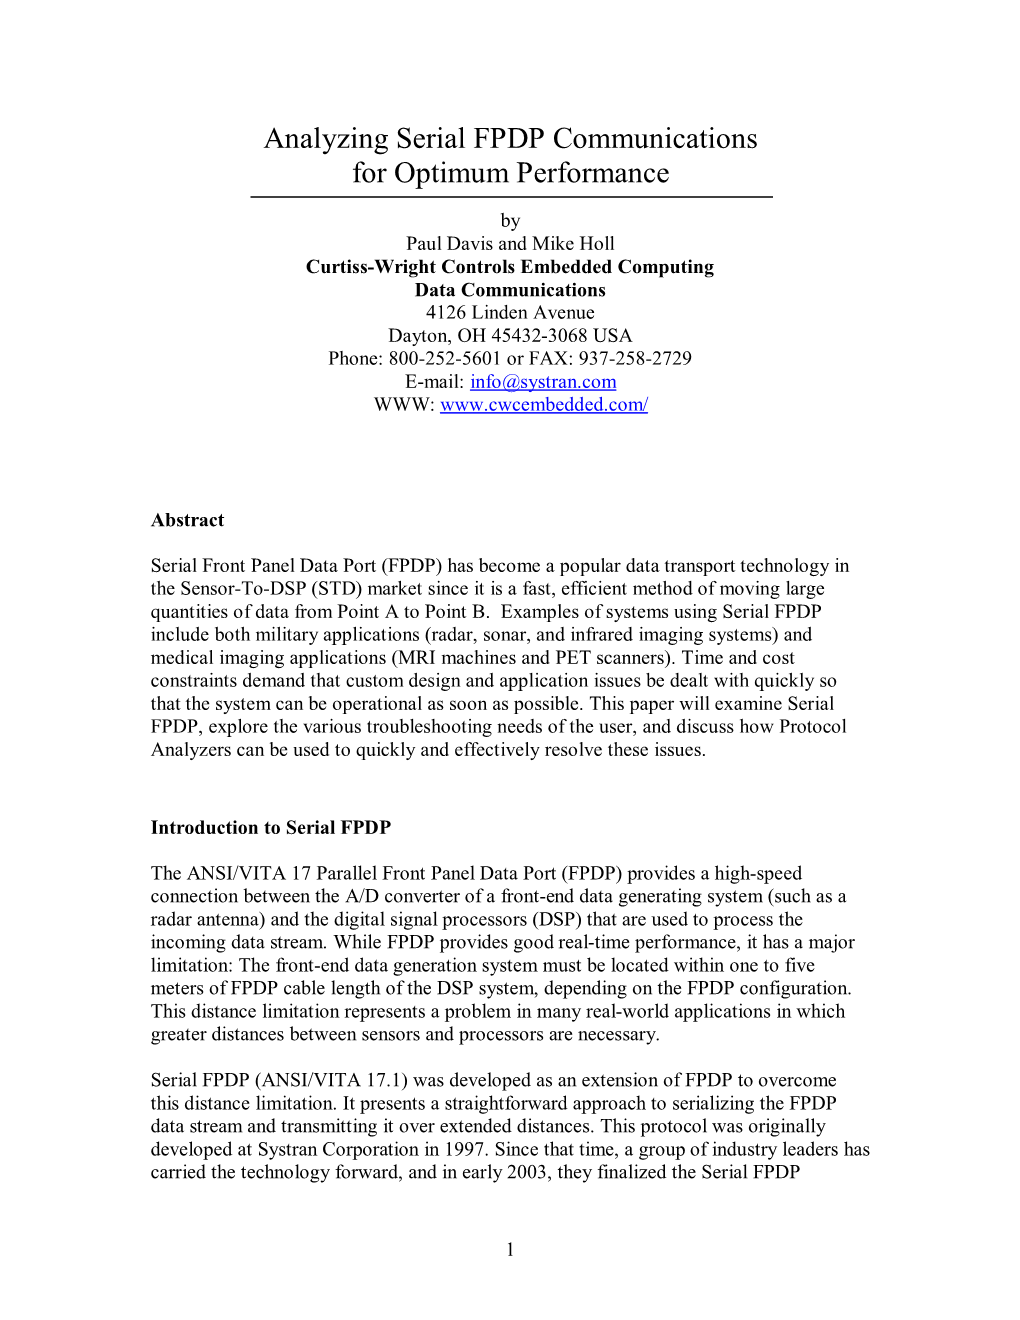 Analyzing Serial FPDP Communications for Optimum Performance